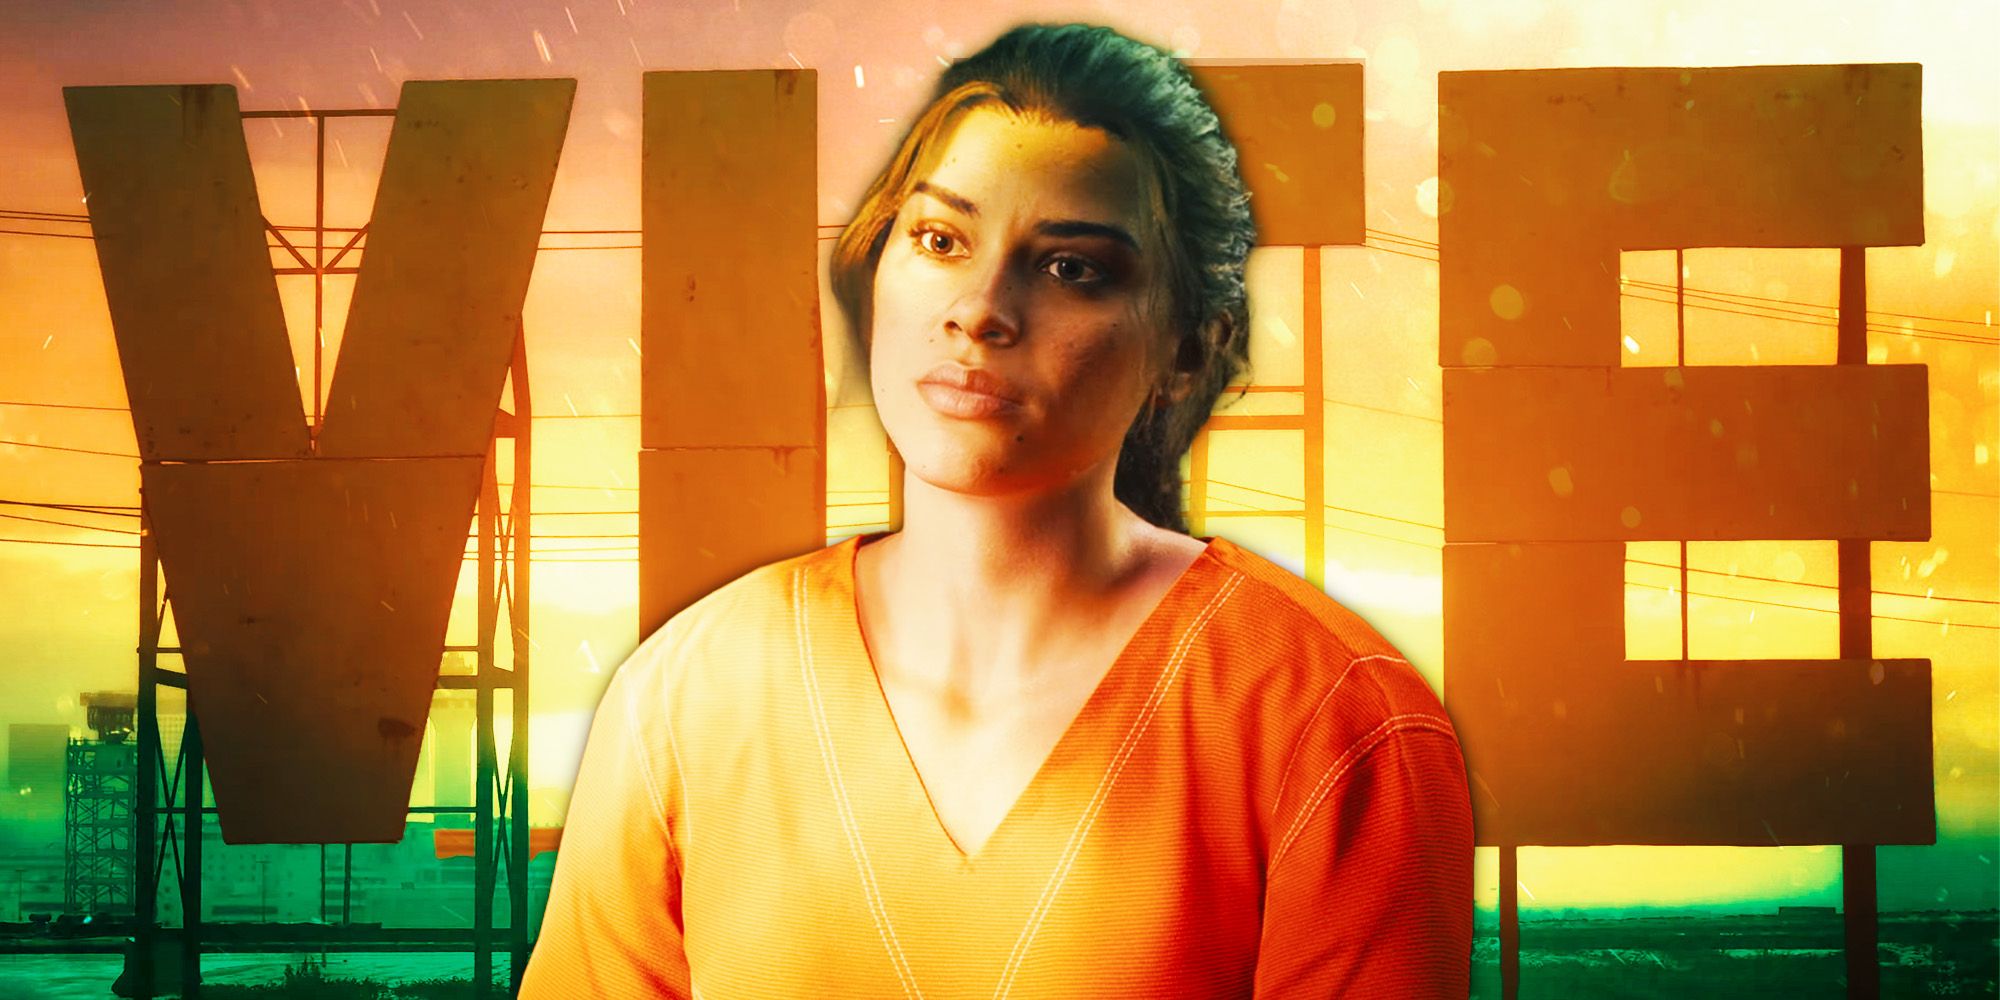 Lucia, the protagonist of GTA 6, in her orange prison jumpsuit in front of the Vice City sign in screnshots from the trailer.